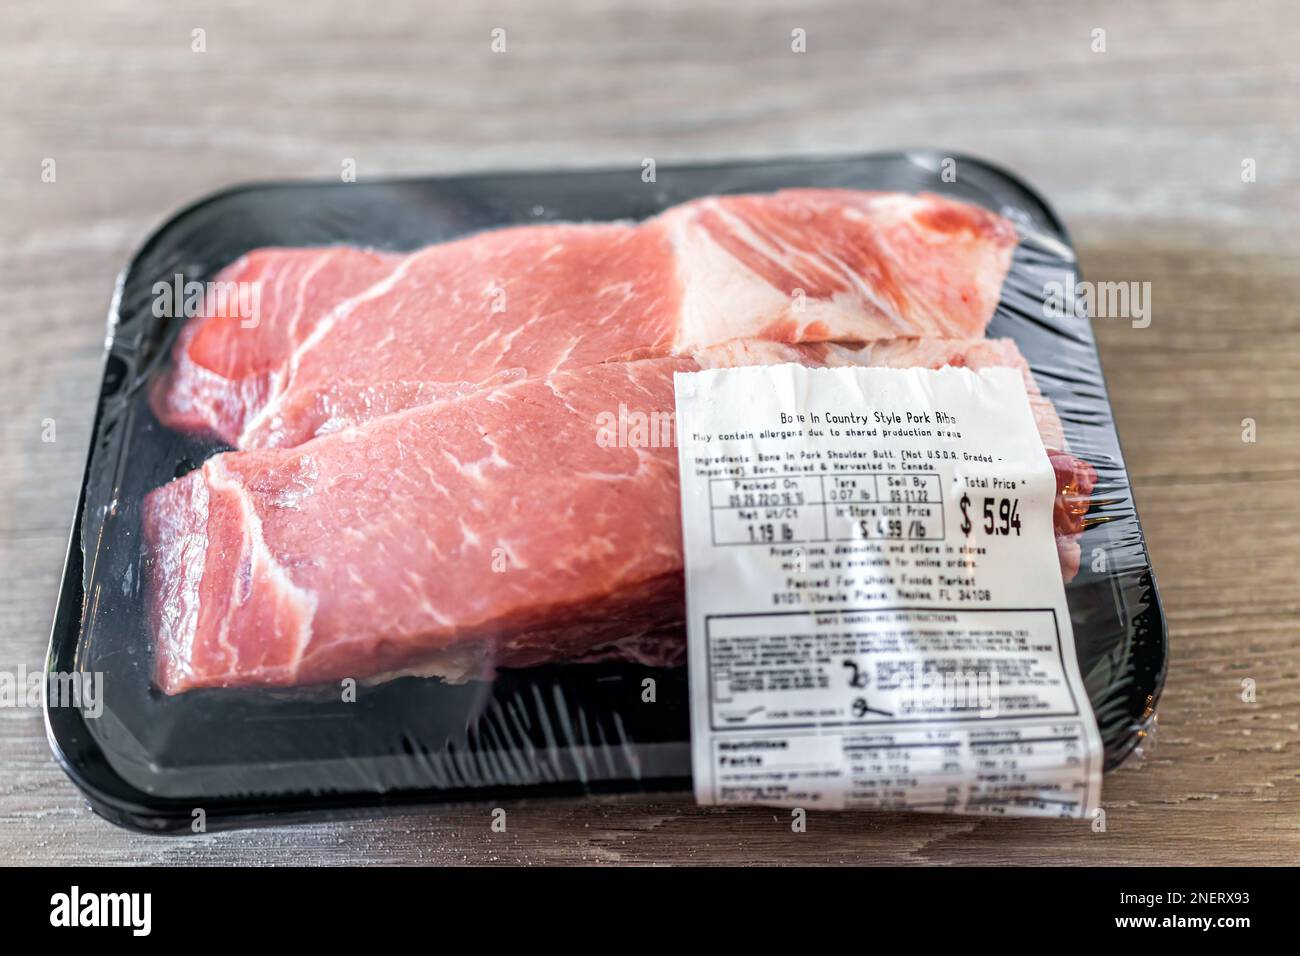 Naples, USA - May 27, 2022: Package product of raw bone-in country style pork ribs meat by Whole Foods Market butcher with price sign Stock Photo